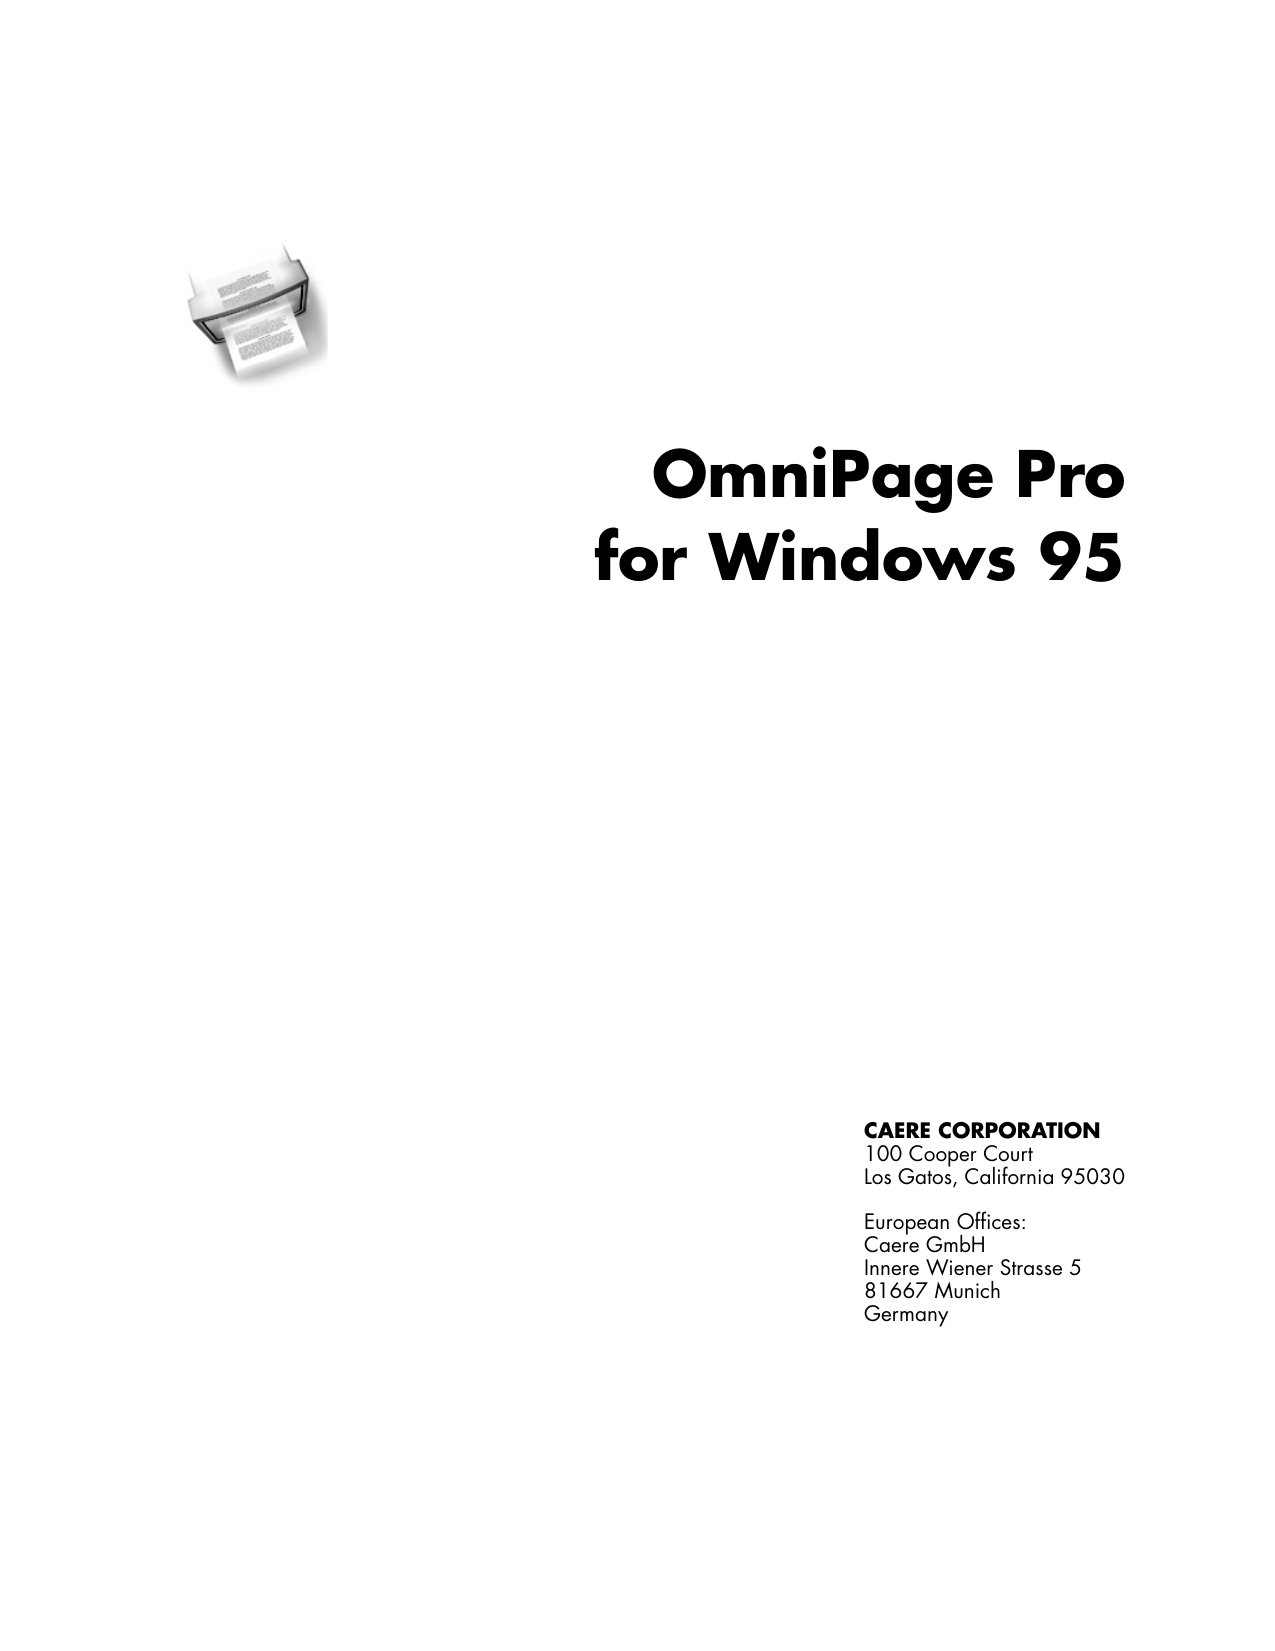 omnipage pro serial number 11